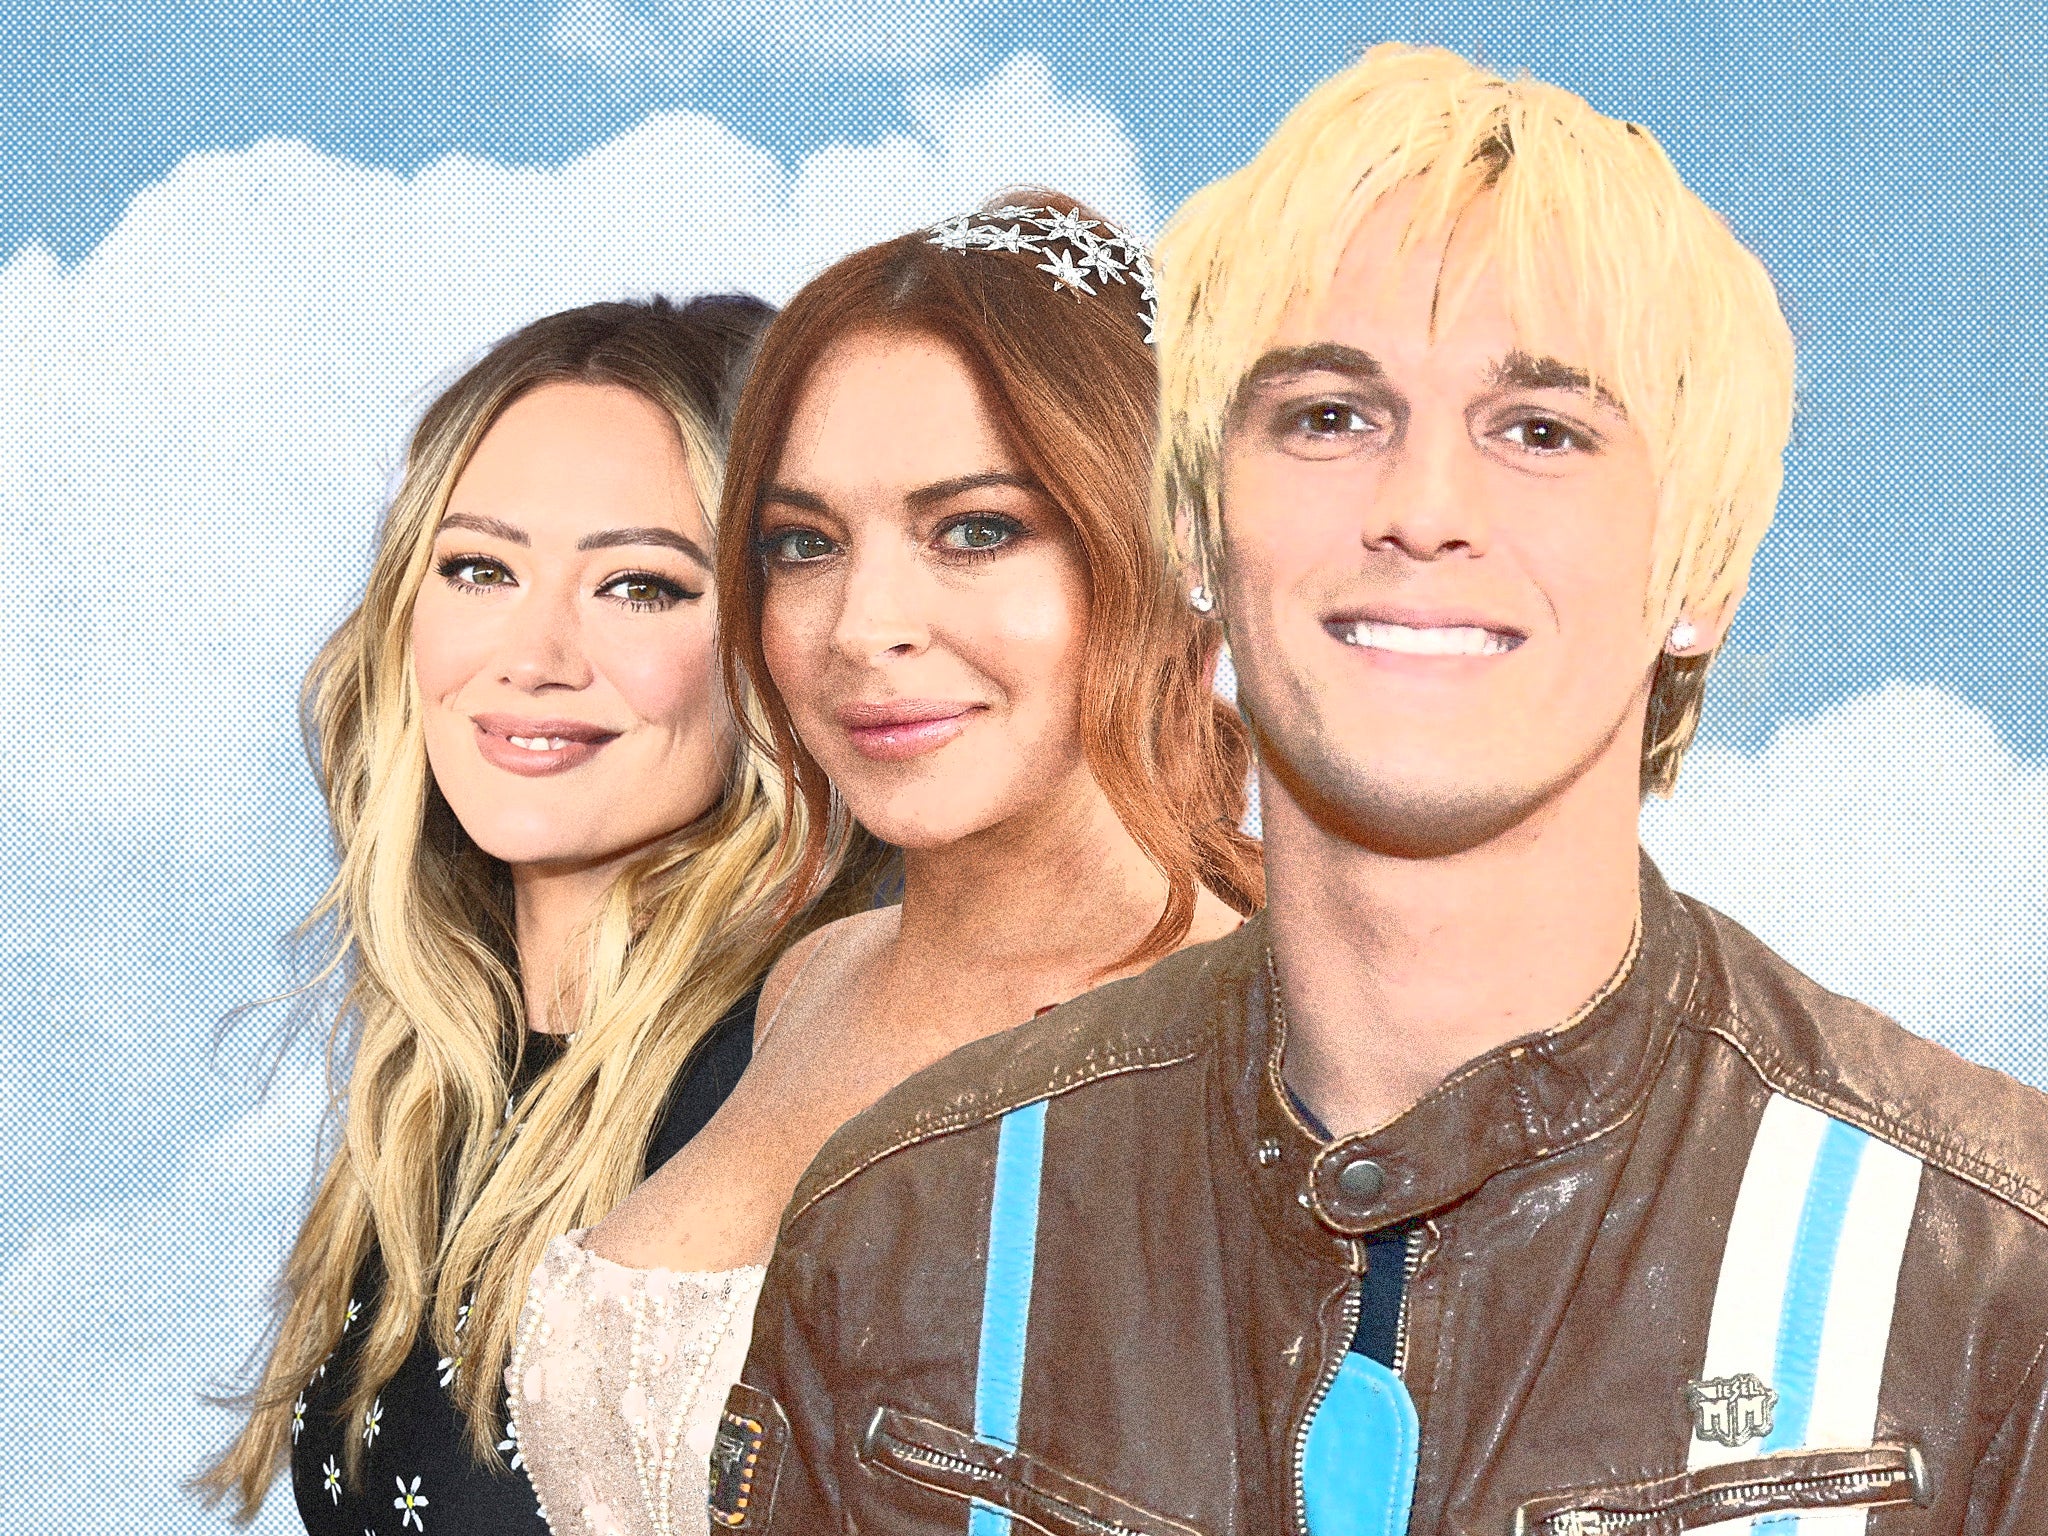 Hilary Duff, Lindsay Lohan and their mutual ex Aaron Carter, who died on 5 November at 34